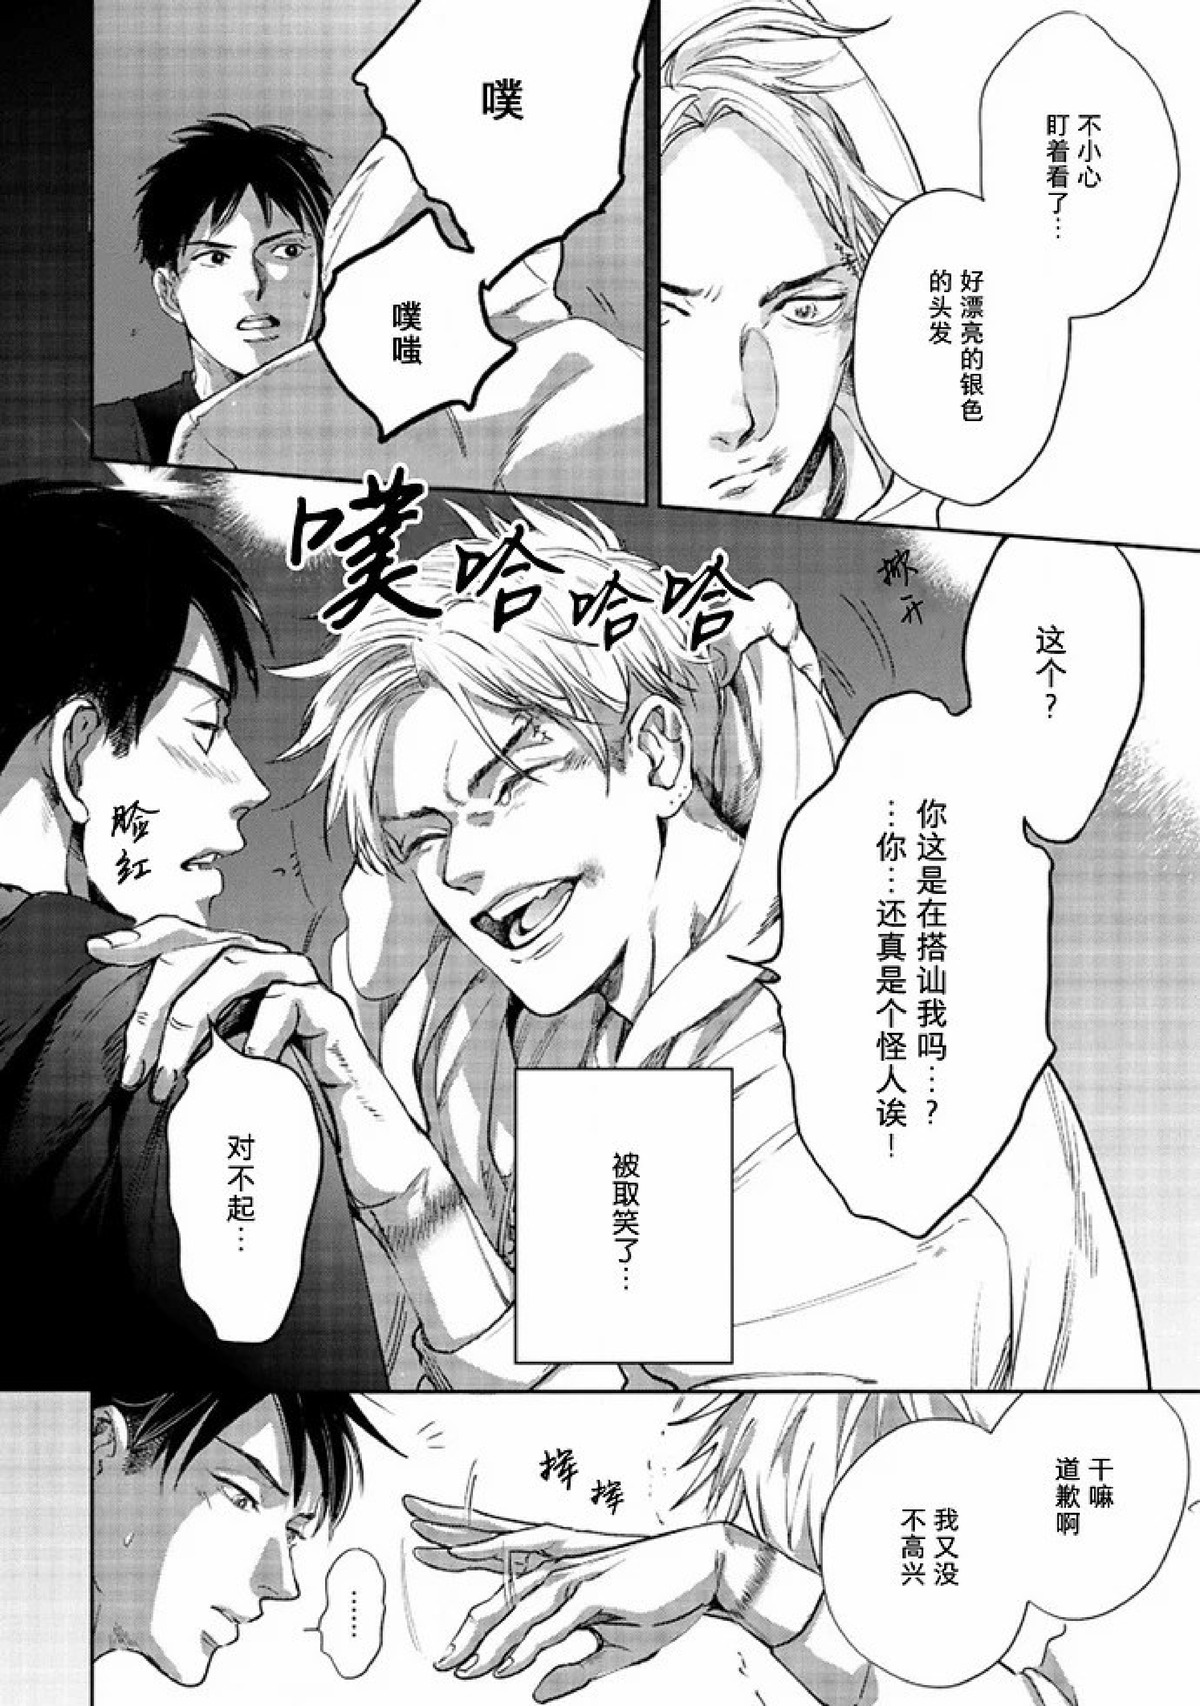 【Two sides of the same coin[腐漫]】漫画-（上卷01-02）章节漫画下拉式图片-36.jpg